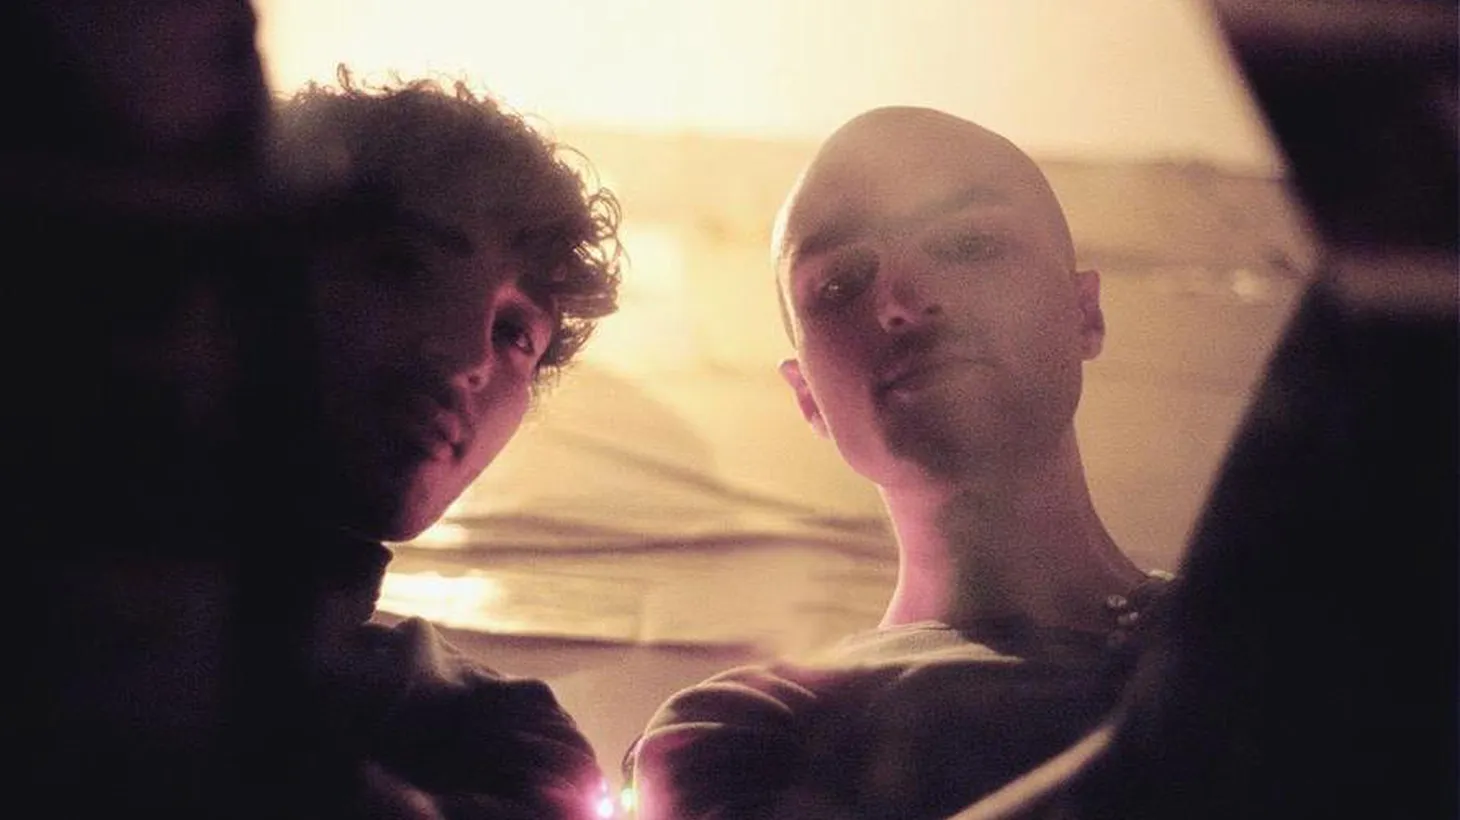 Canadian electronic duo Majical Cloudz get loopy on Morning Becomes Eclectic at 11:15am.